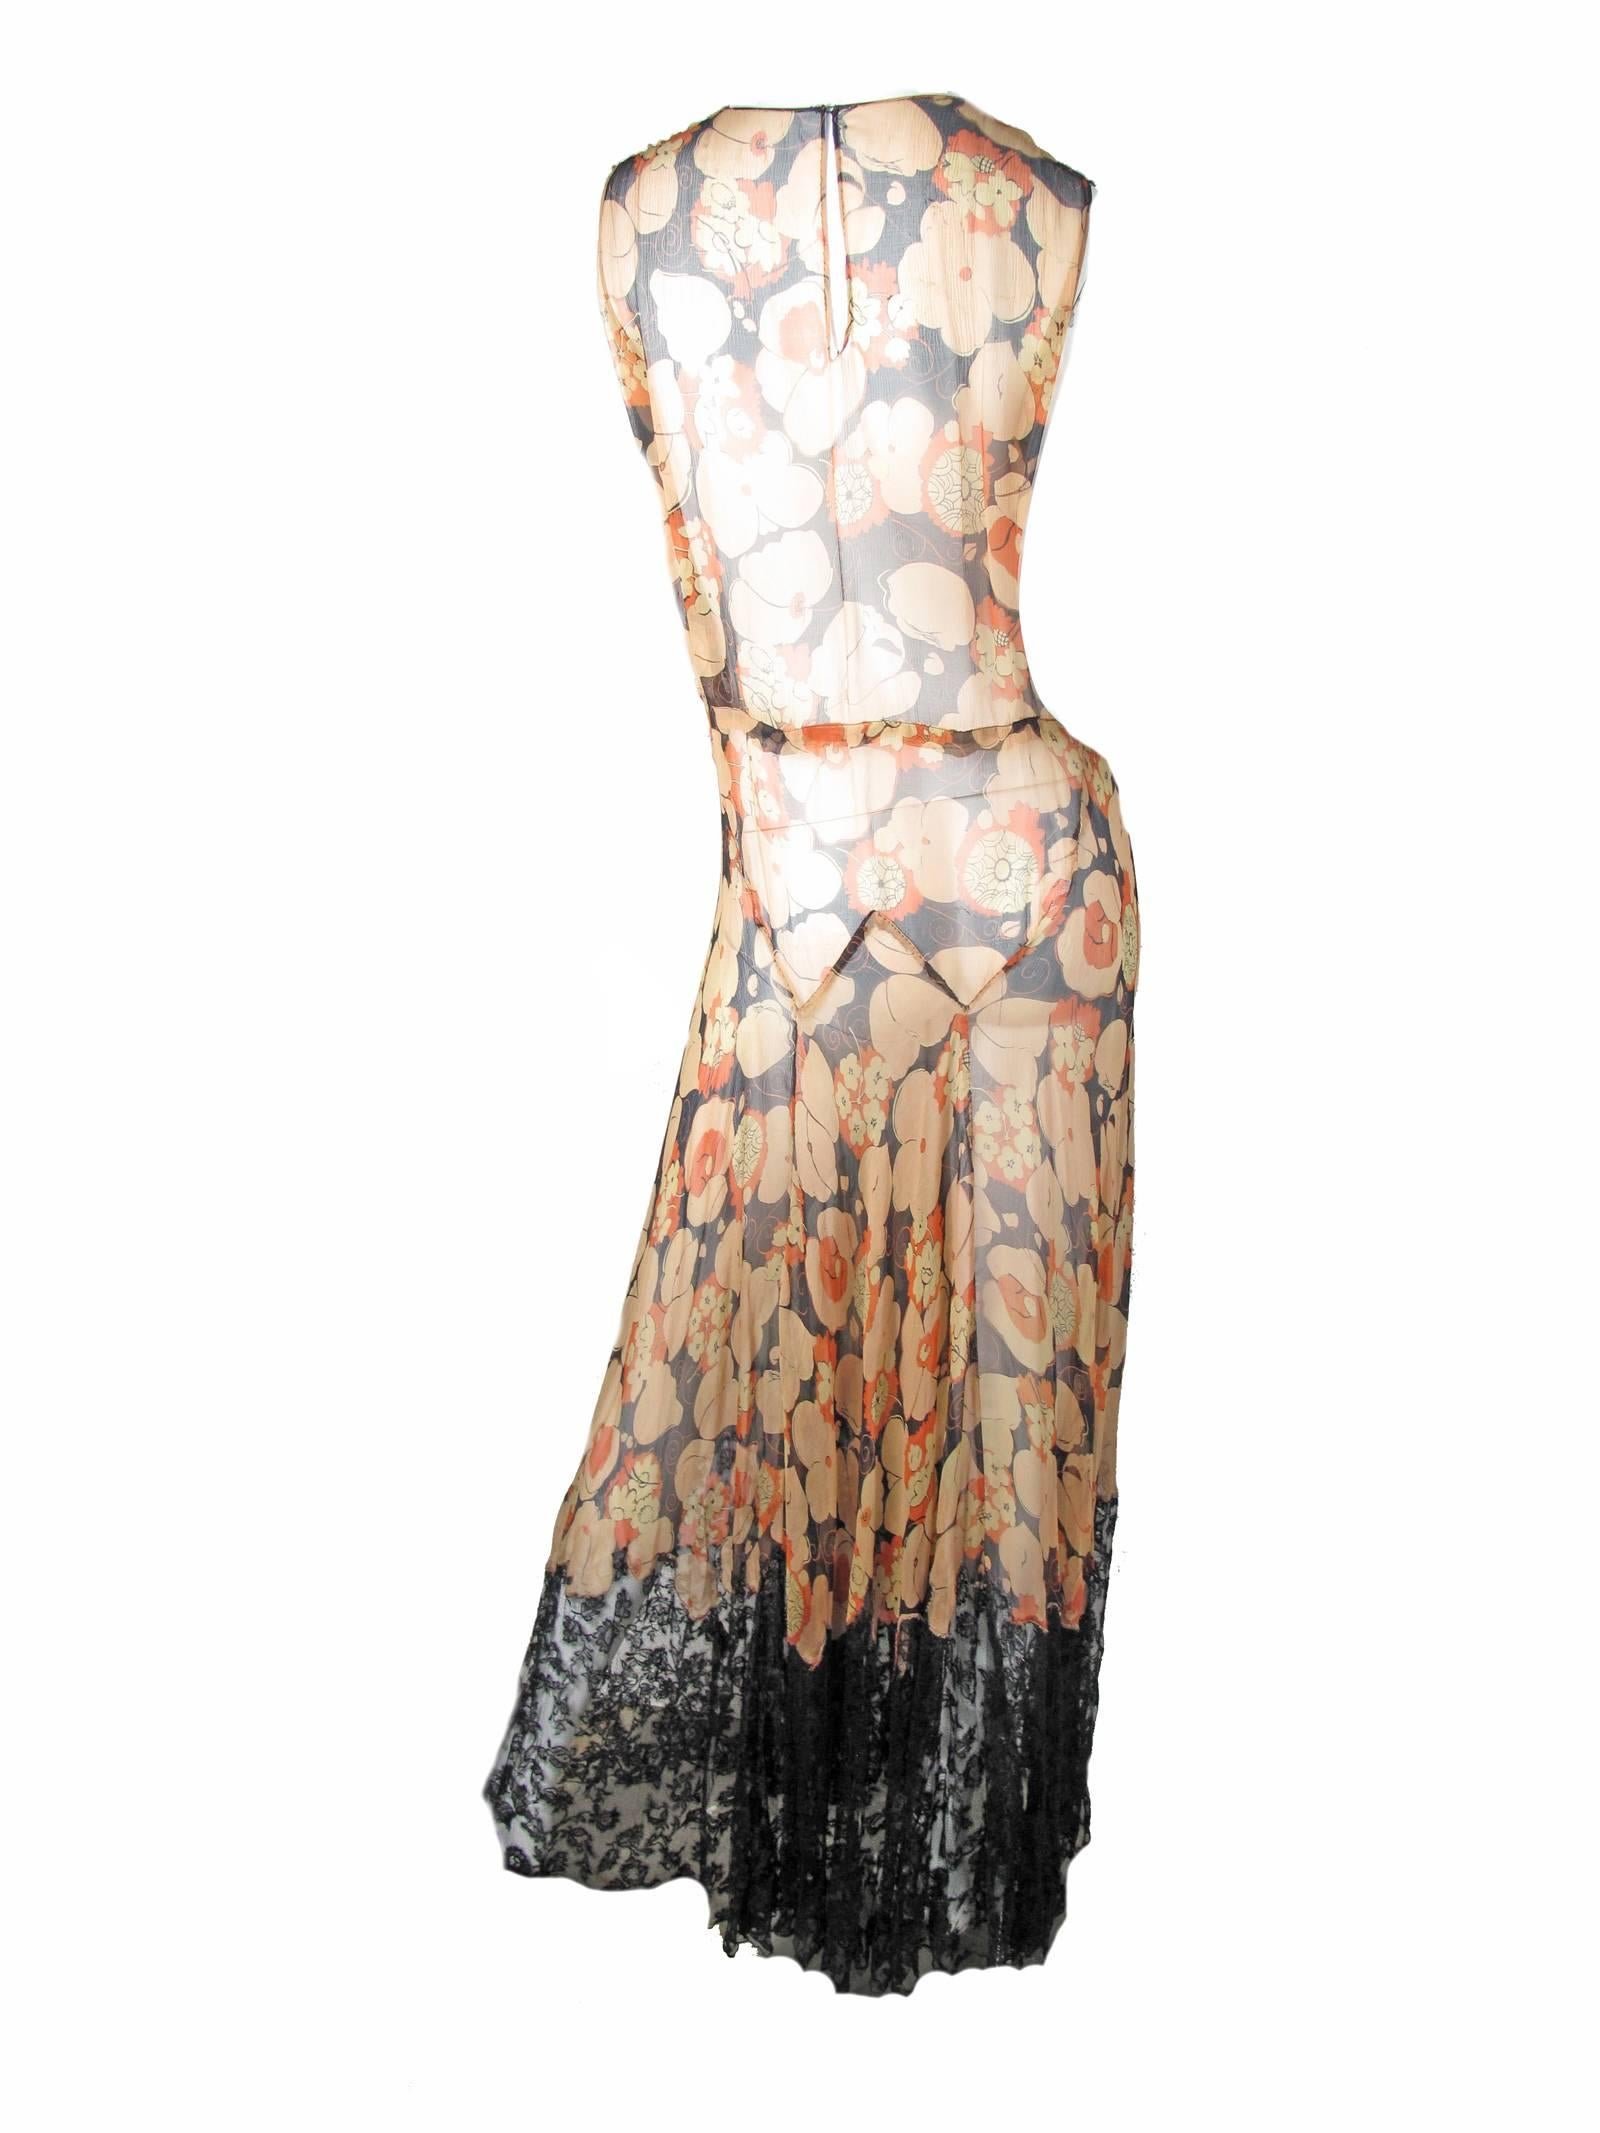 Sheer Chiffon Floral Gown and Jacket with Lace, 1920s - 30s   In Fair Condition In Austin, TX